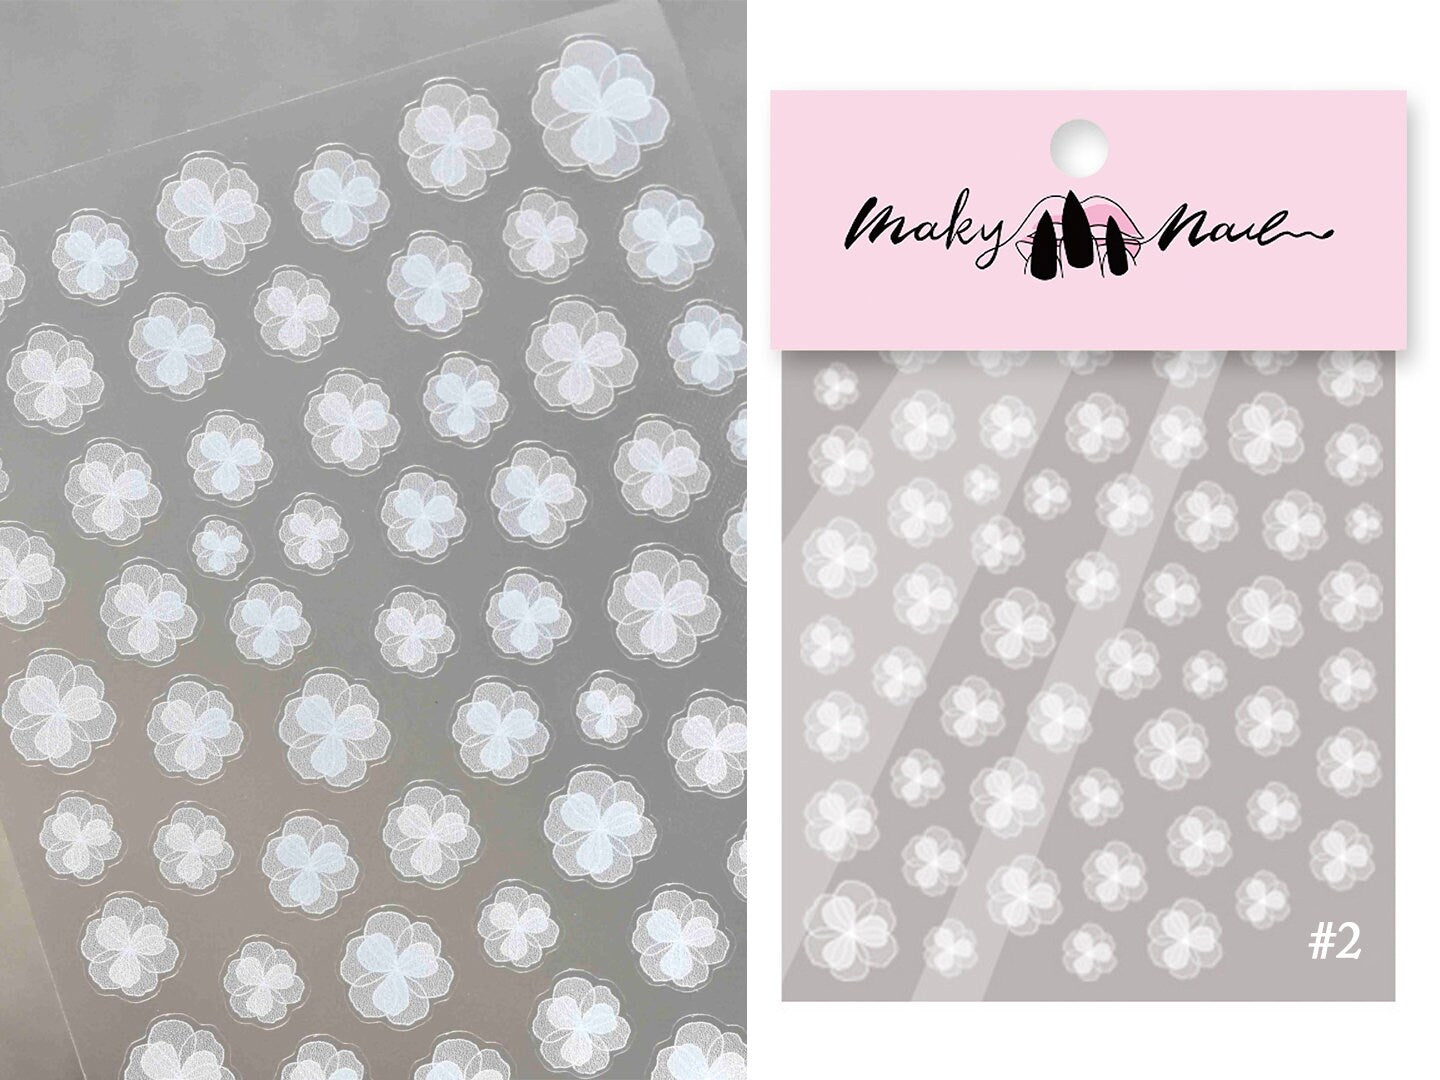 Transparent Lace Flower Nail Stickers/ Wedding Bride Laces Nail Art Floral Ultra thin Peel off stencils/Daisy Peony Hydrangea Nails